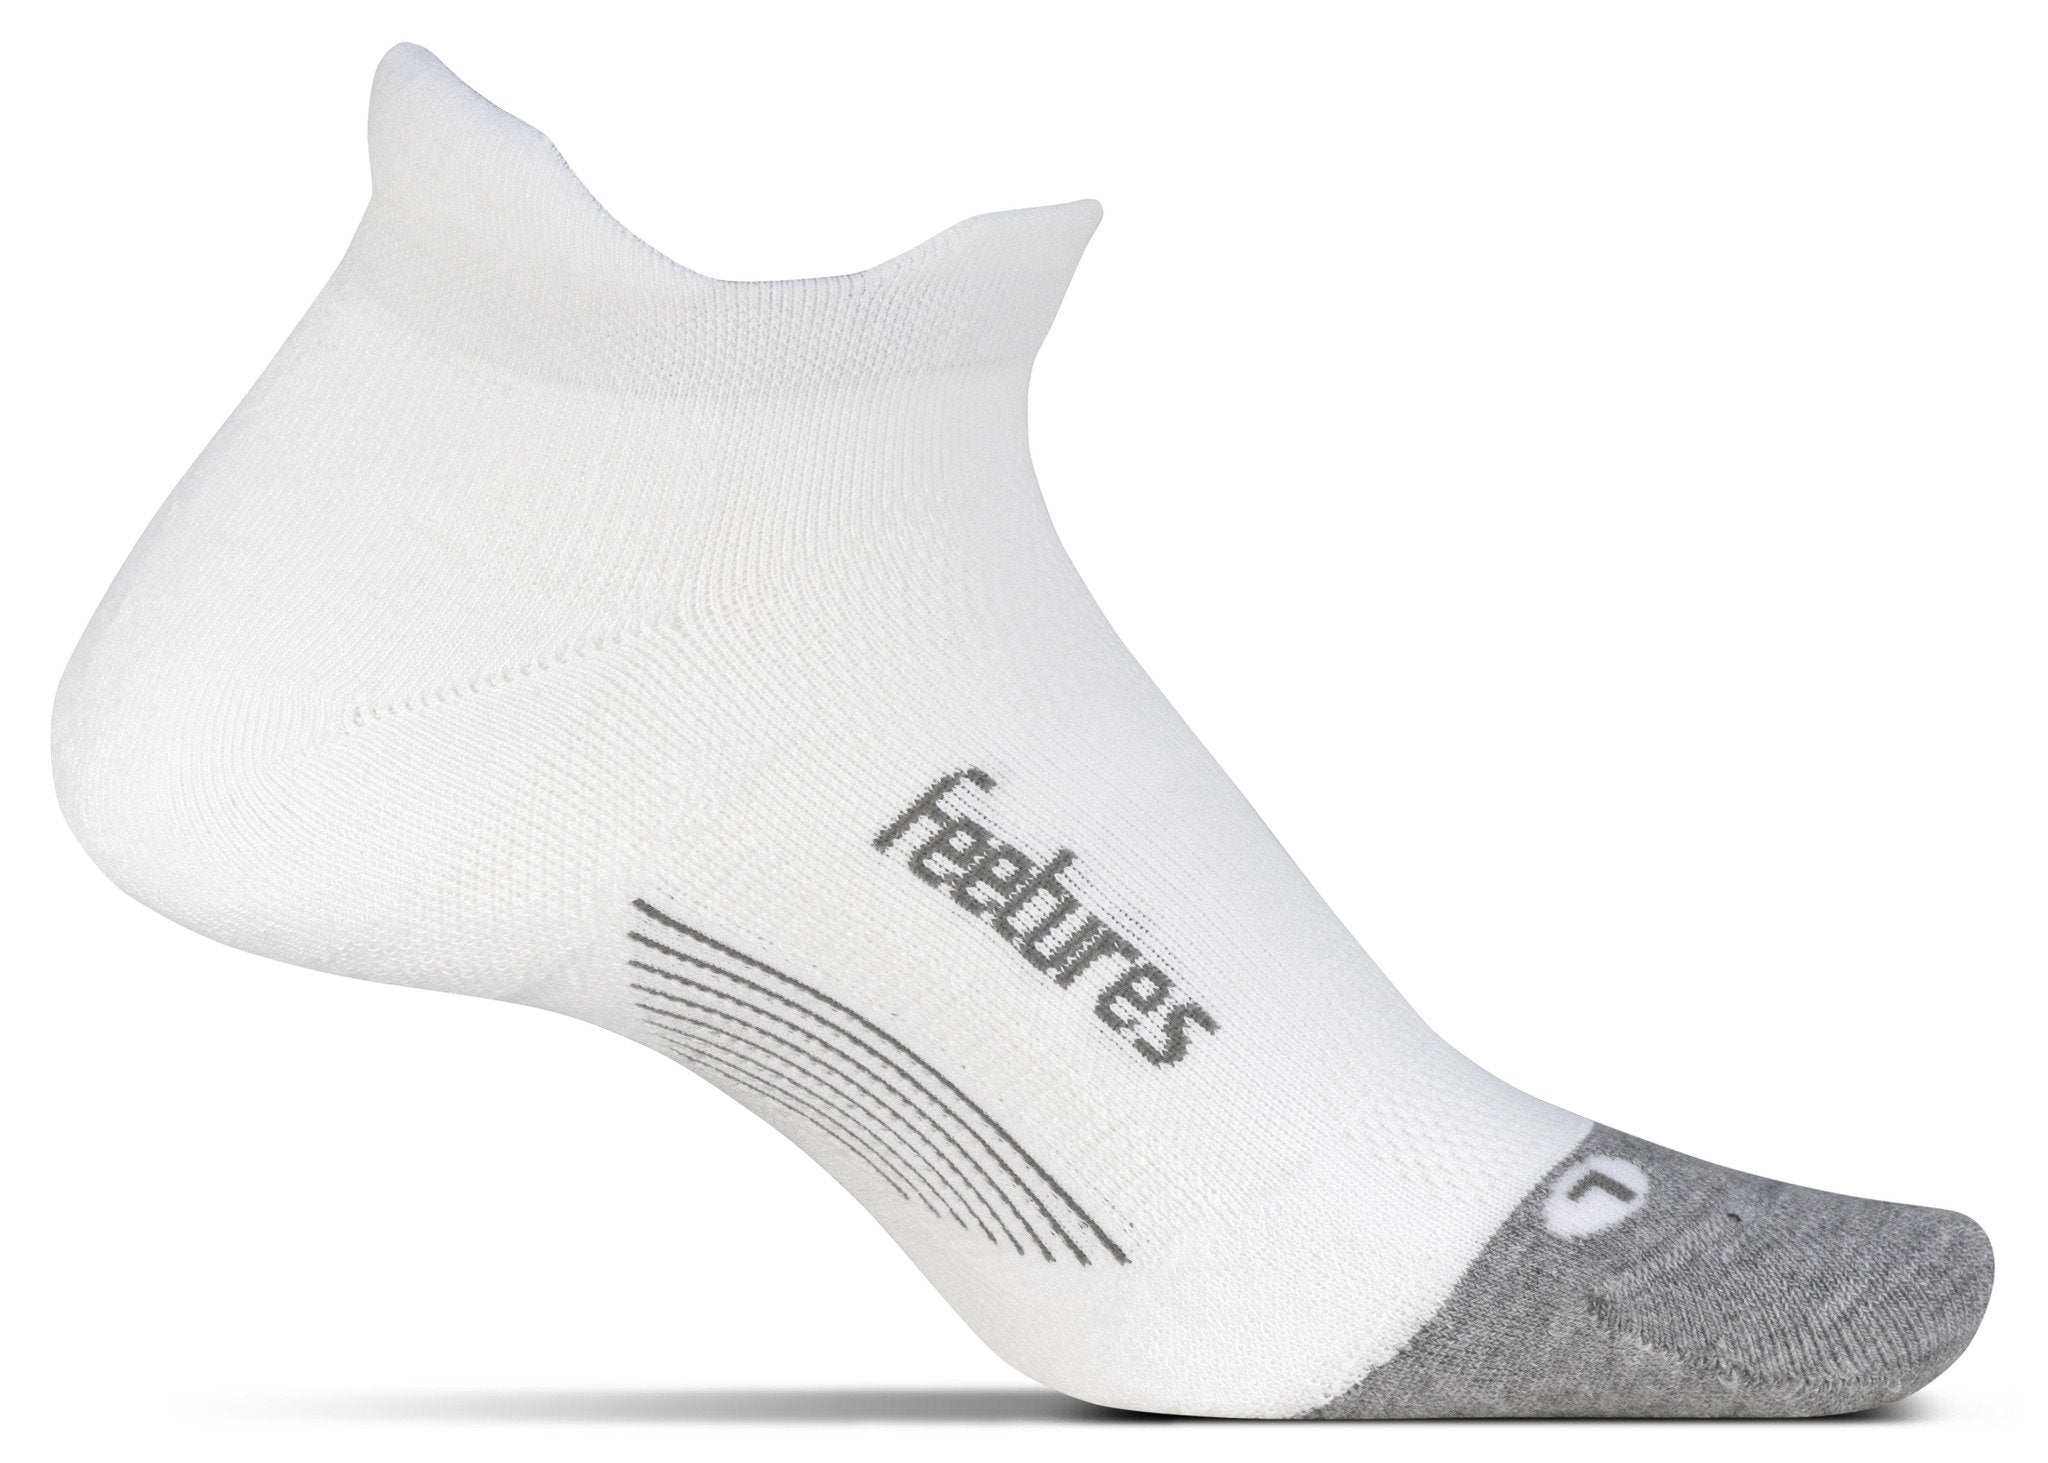 A medial view of the Feetures Elite Max Cushion running sock (left foot) in the color white.